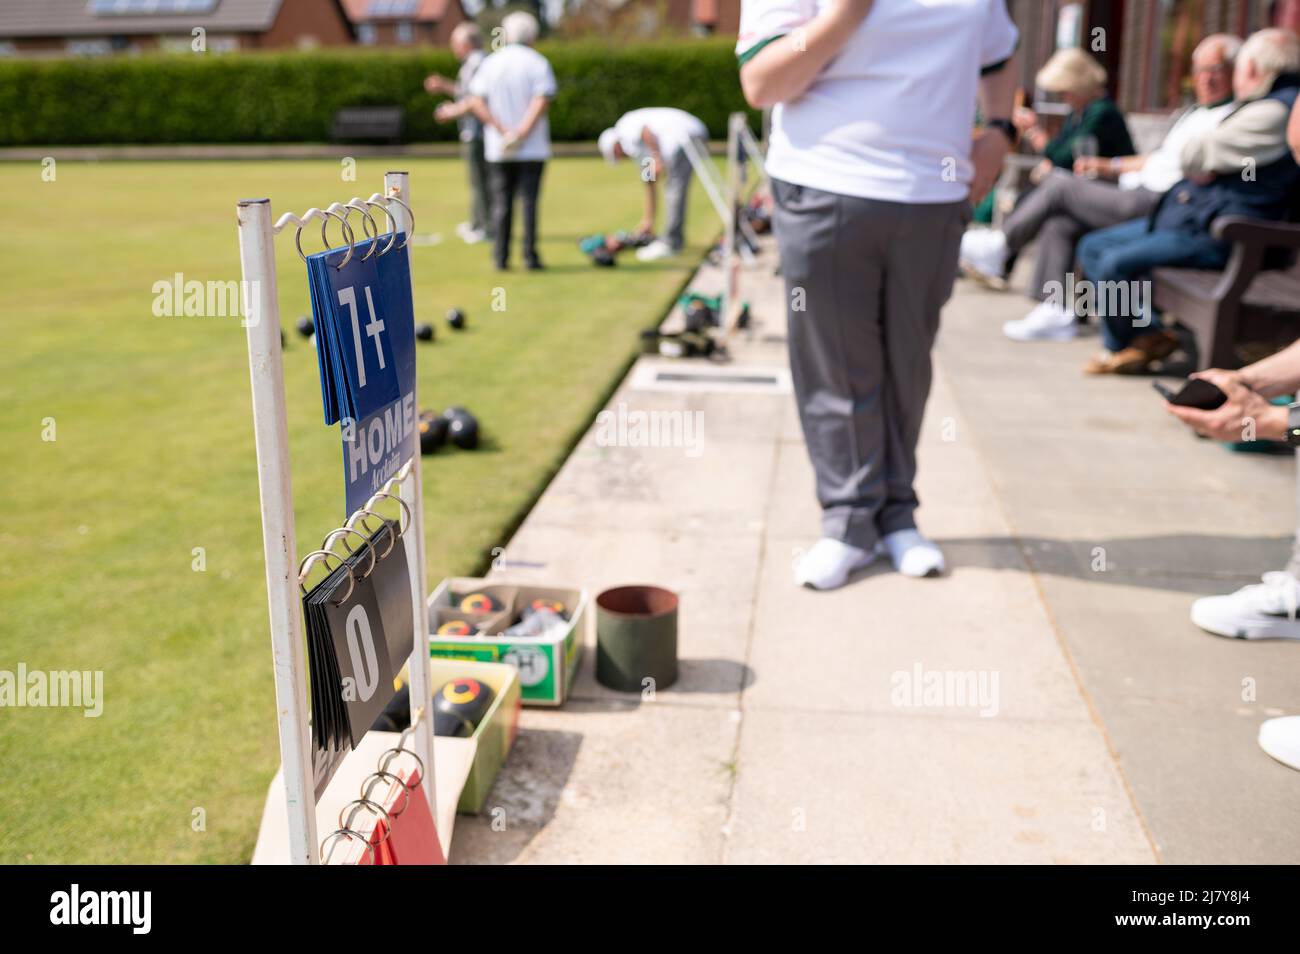 scores at Bowling on green close up low angle british summer sport uk Stock Photo